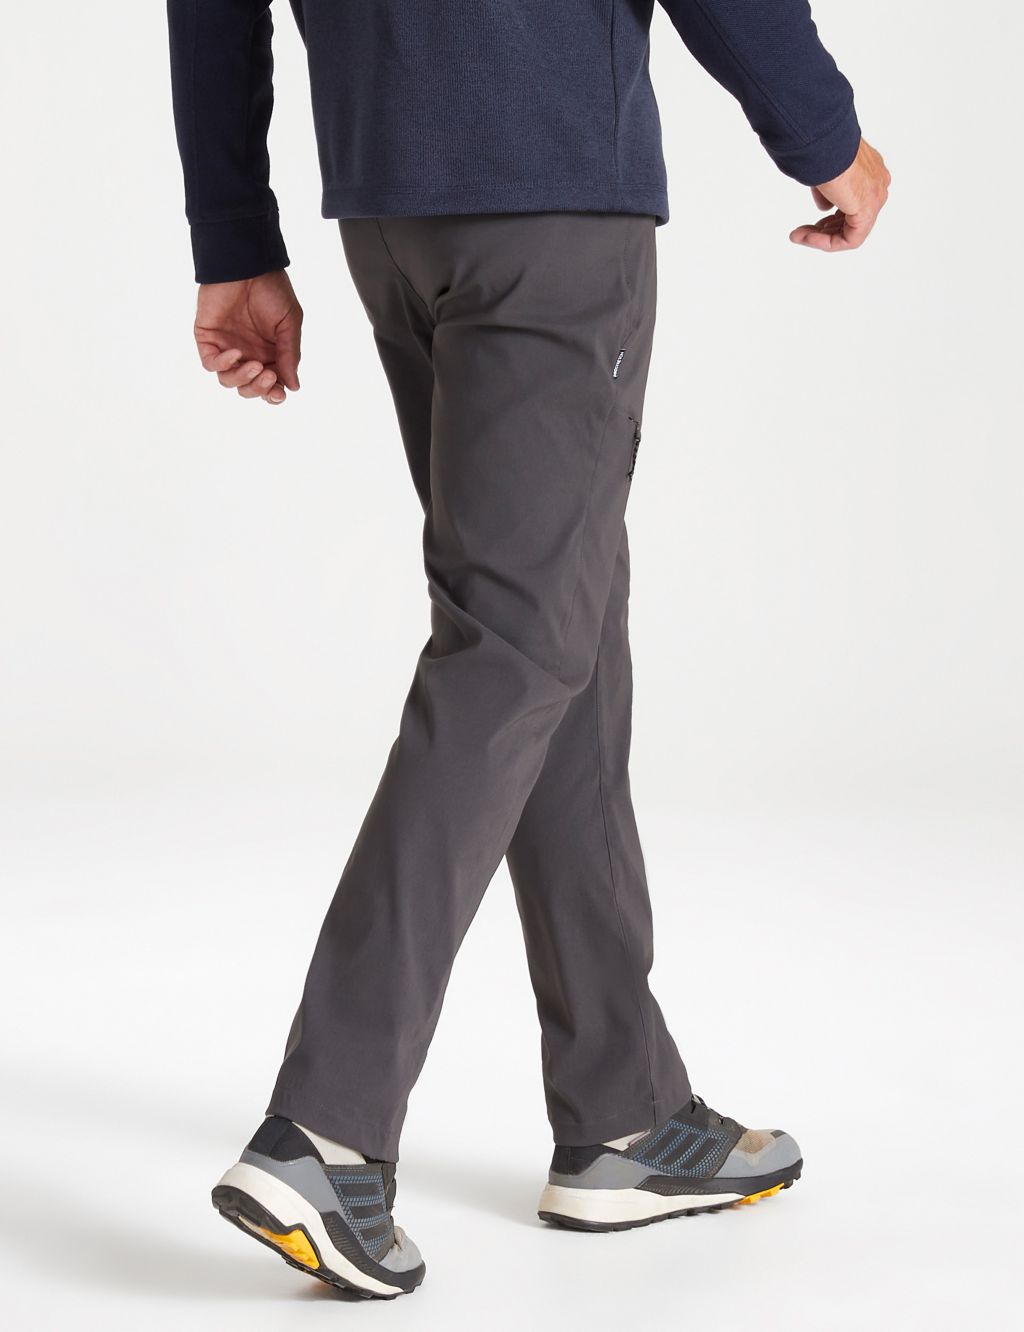 Kiwi Tailored Fit Stretch Trekking Trousers image 3